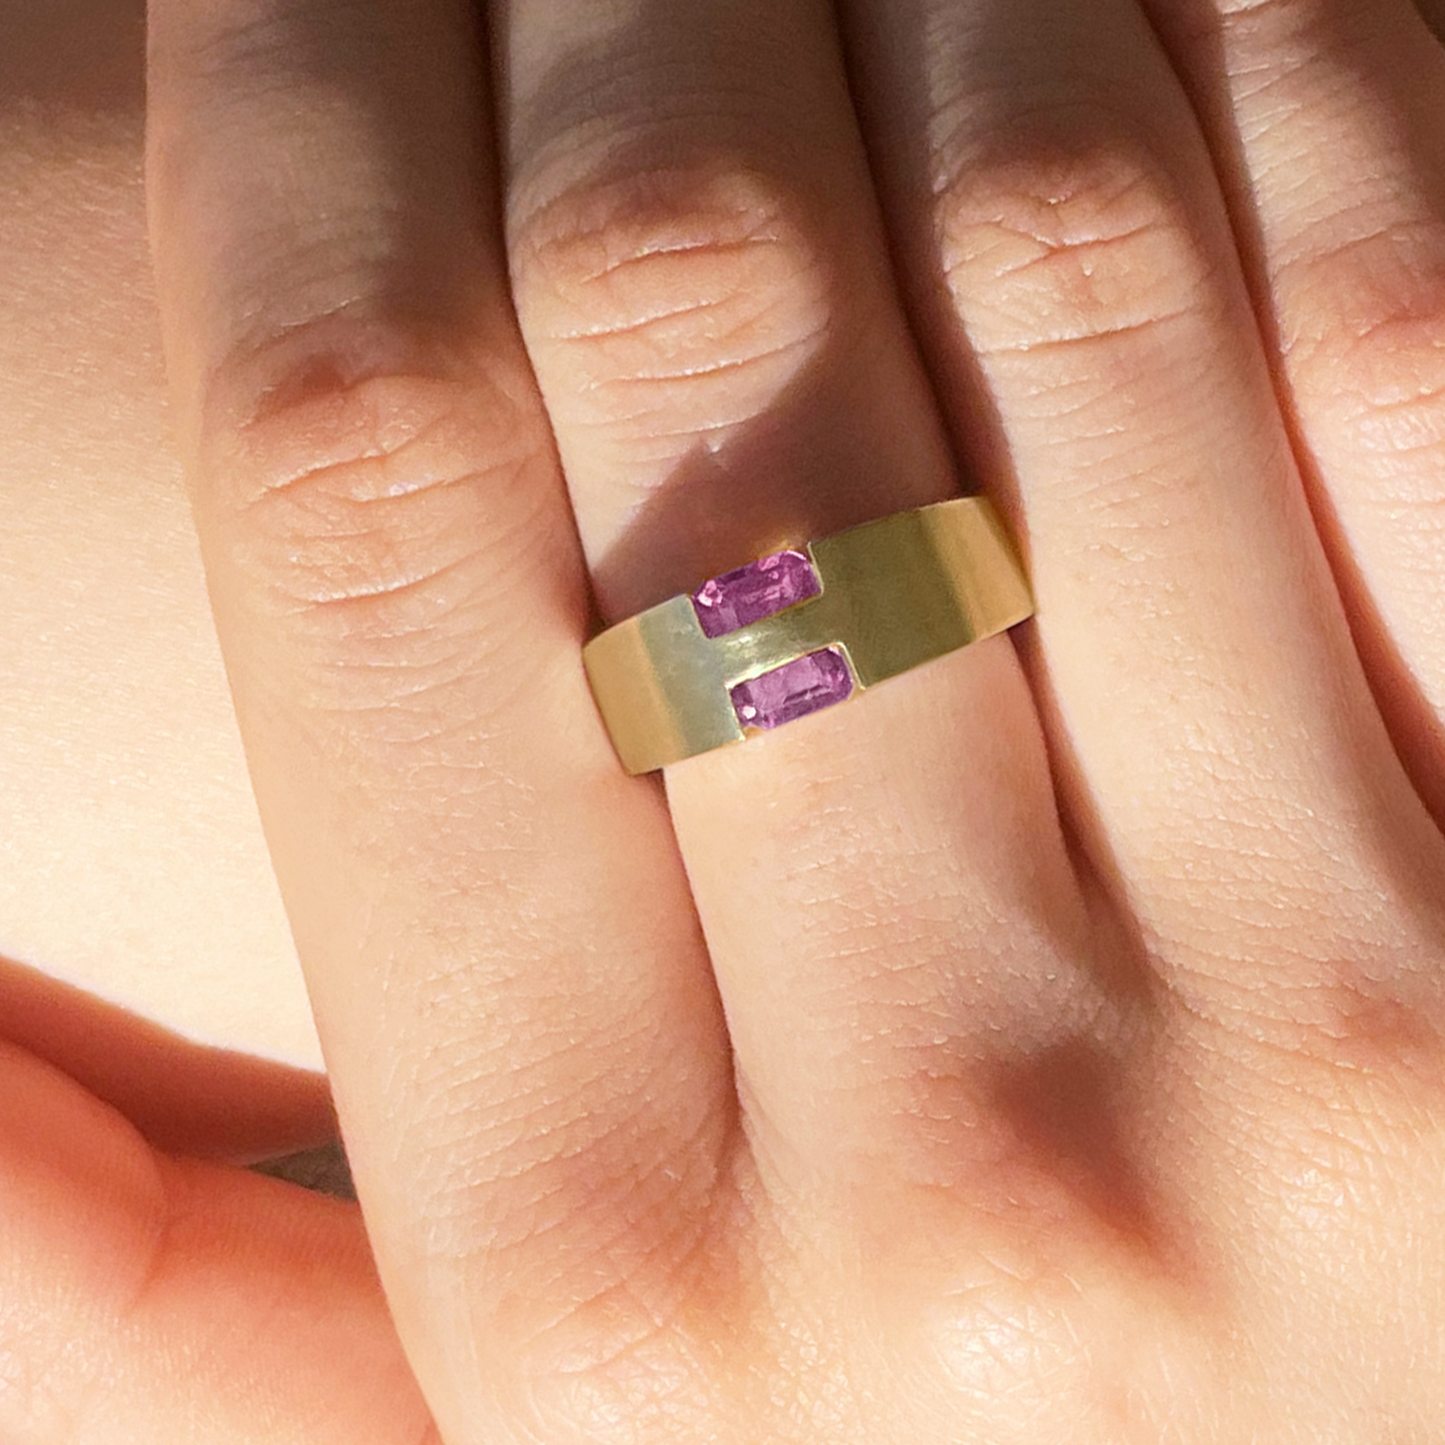 [Amethyst] hide and sparkle gold #exploring